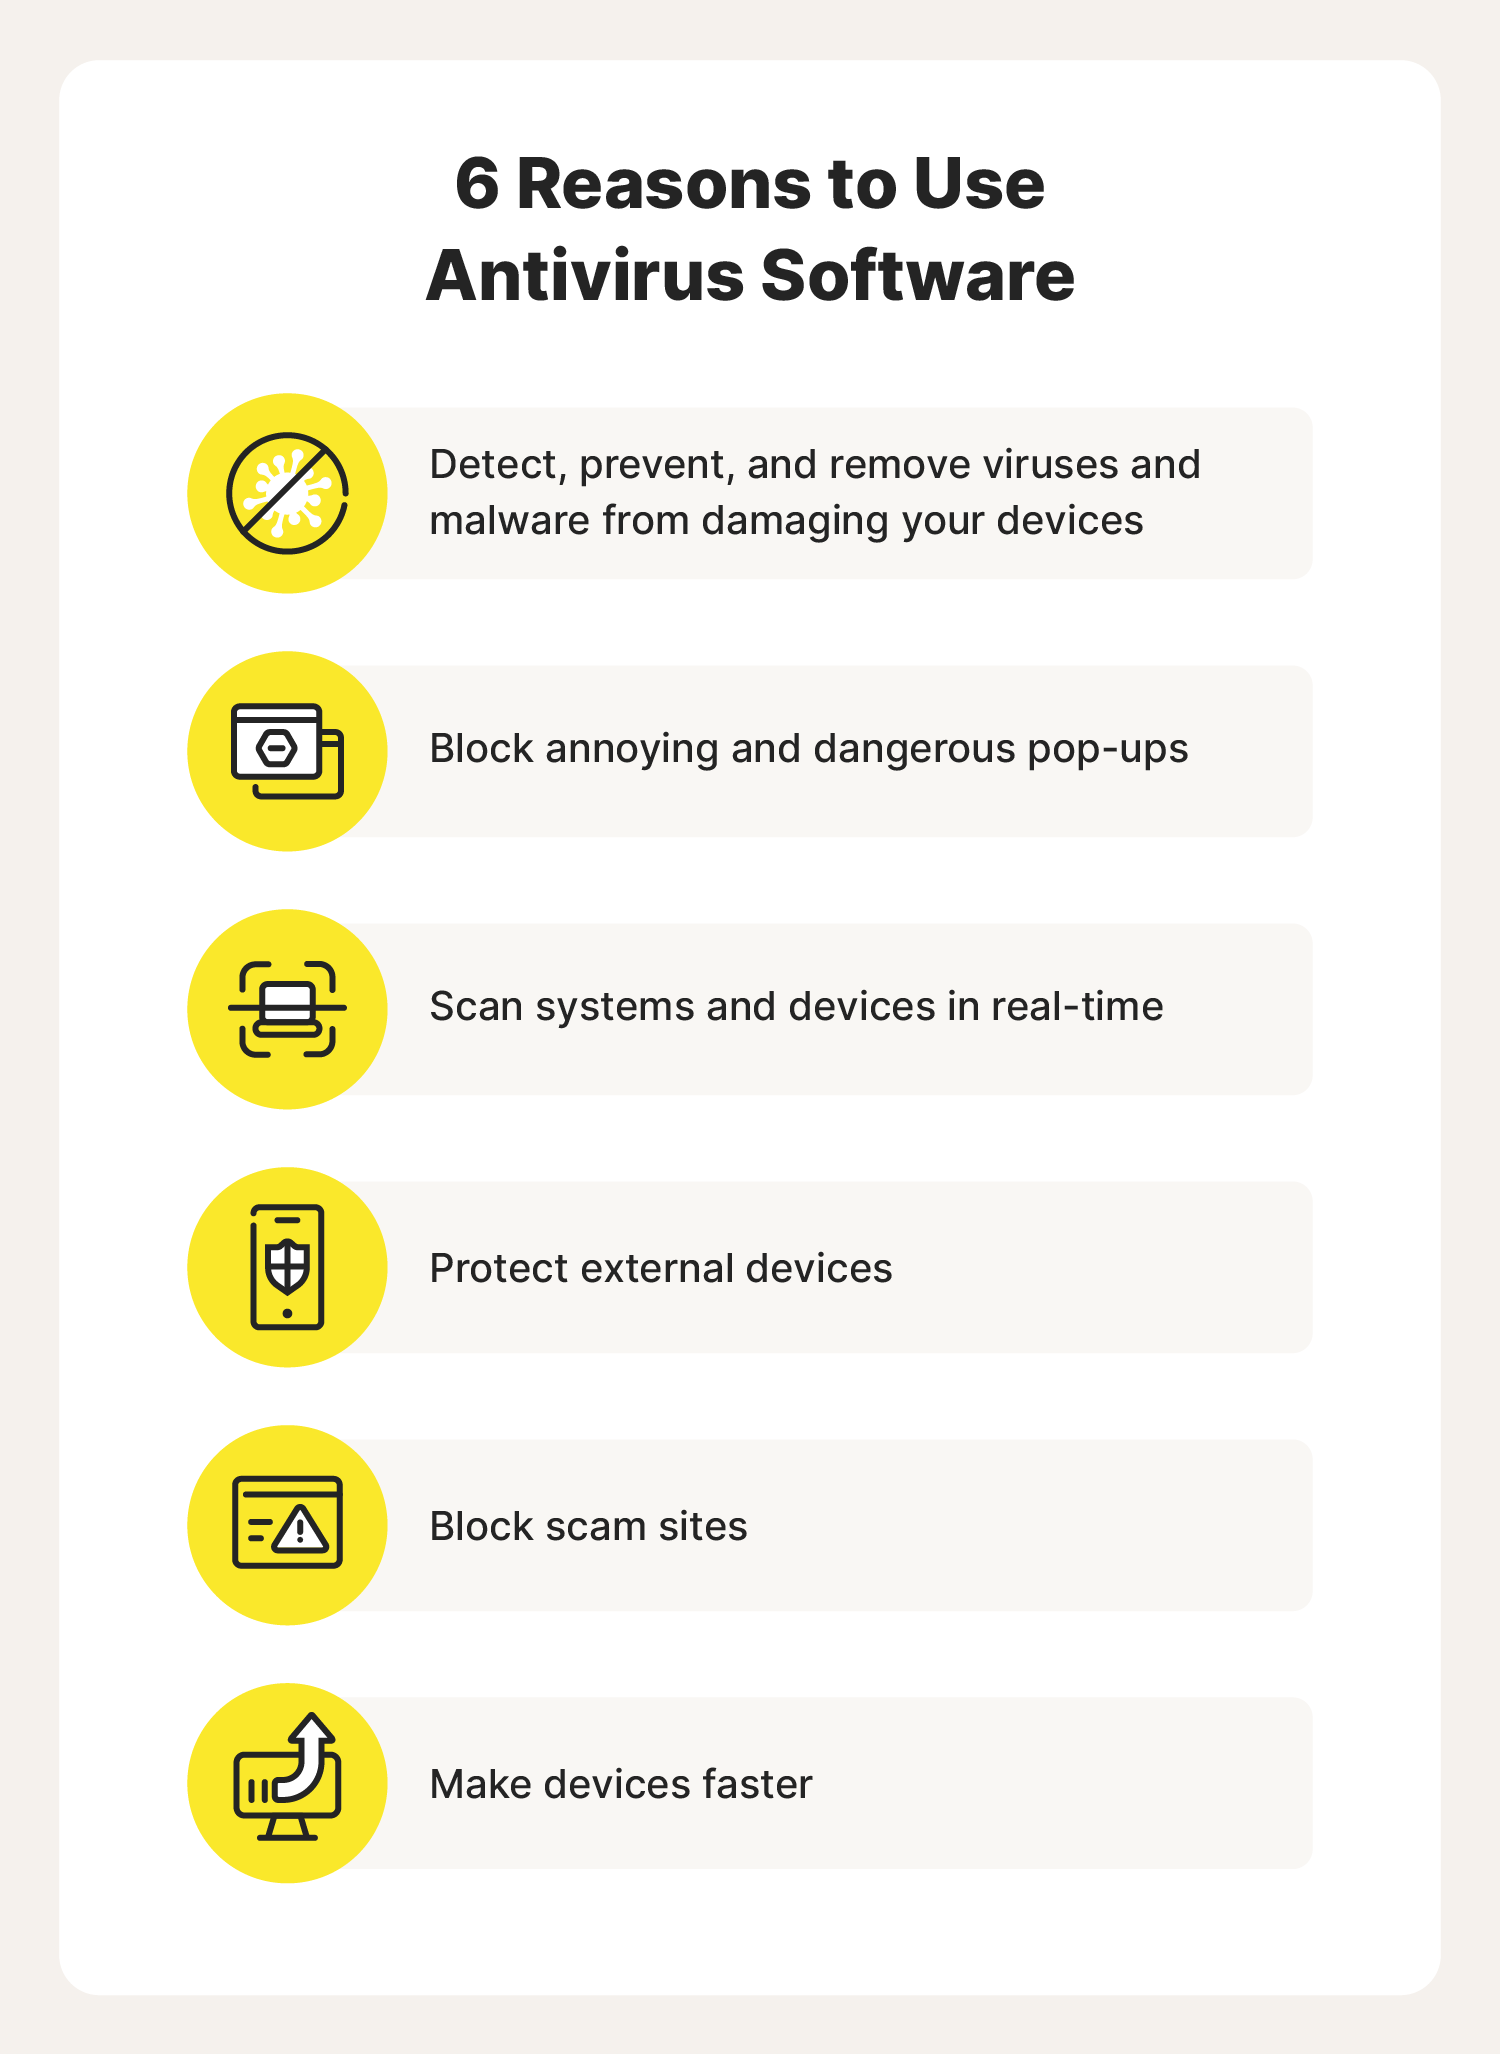 Illustrated chart featuring 6 important reasons to use antivirus software, including device protection and system scanning.